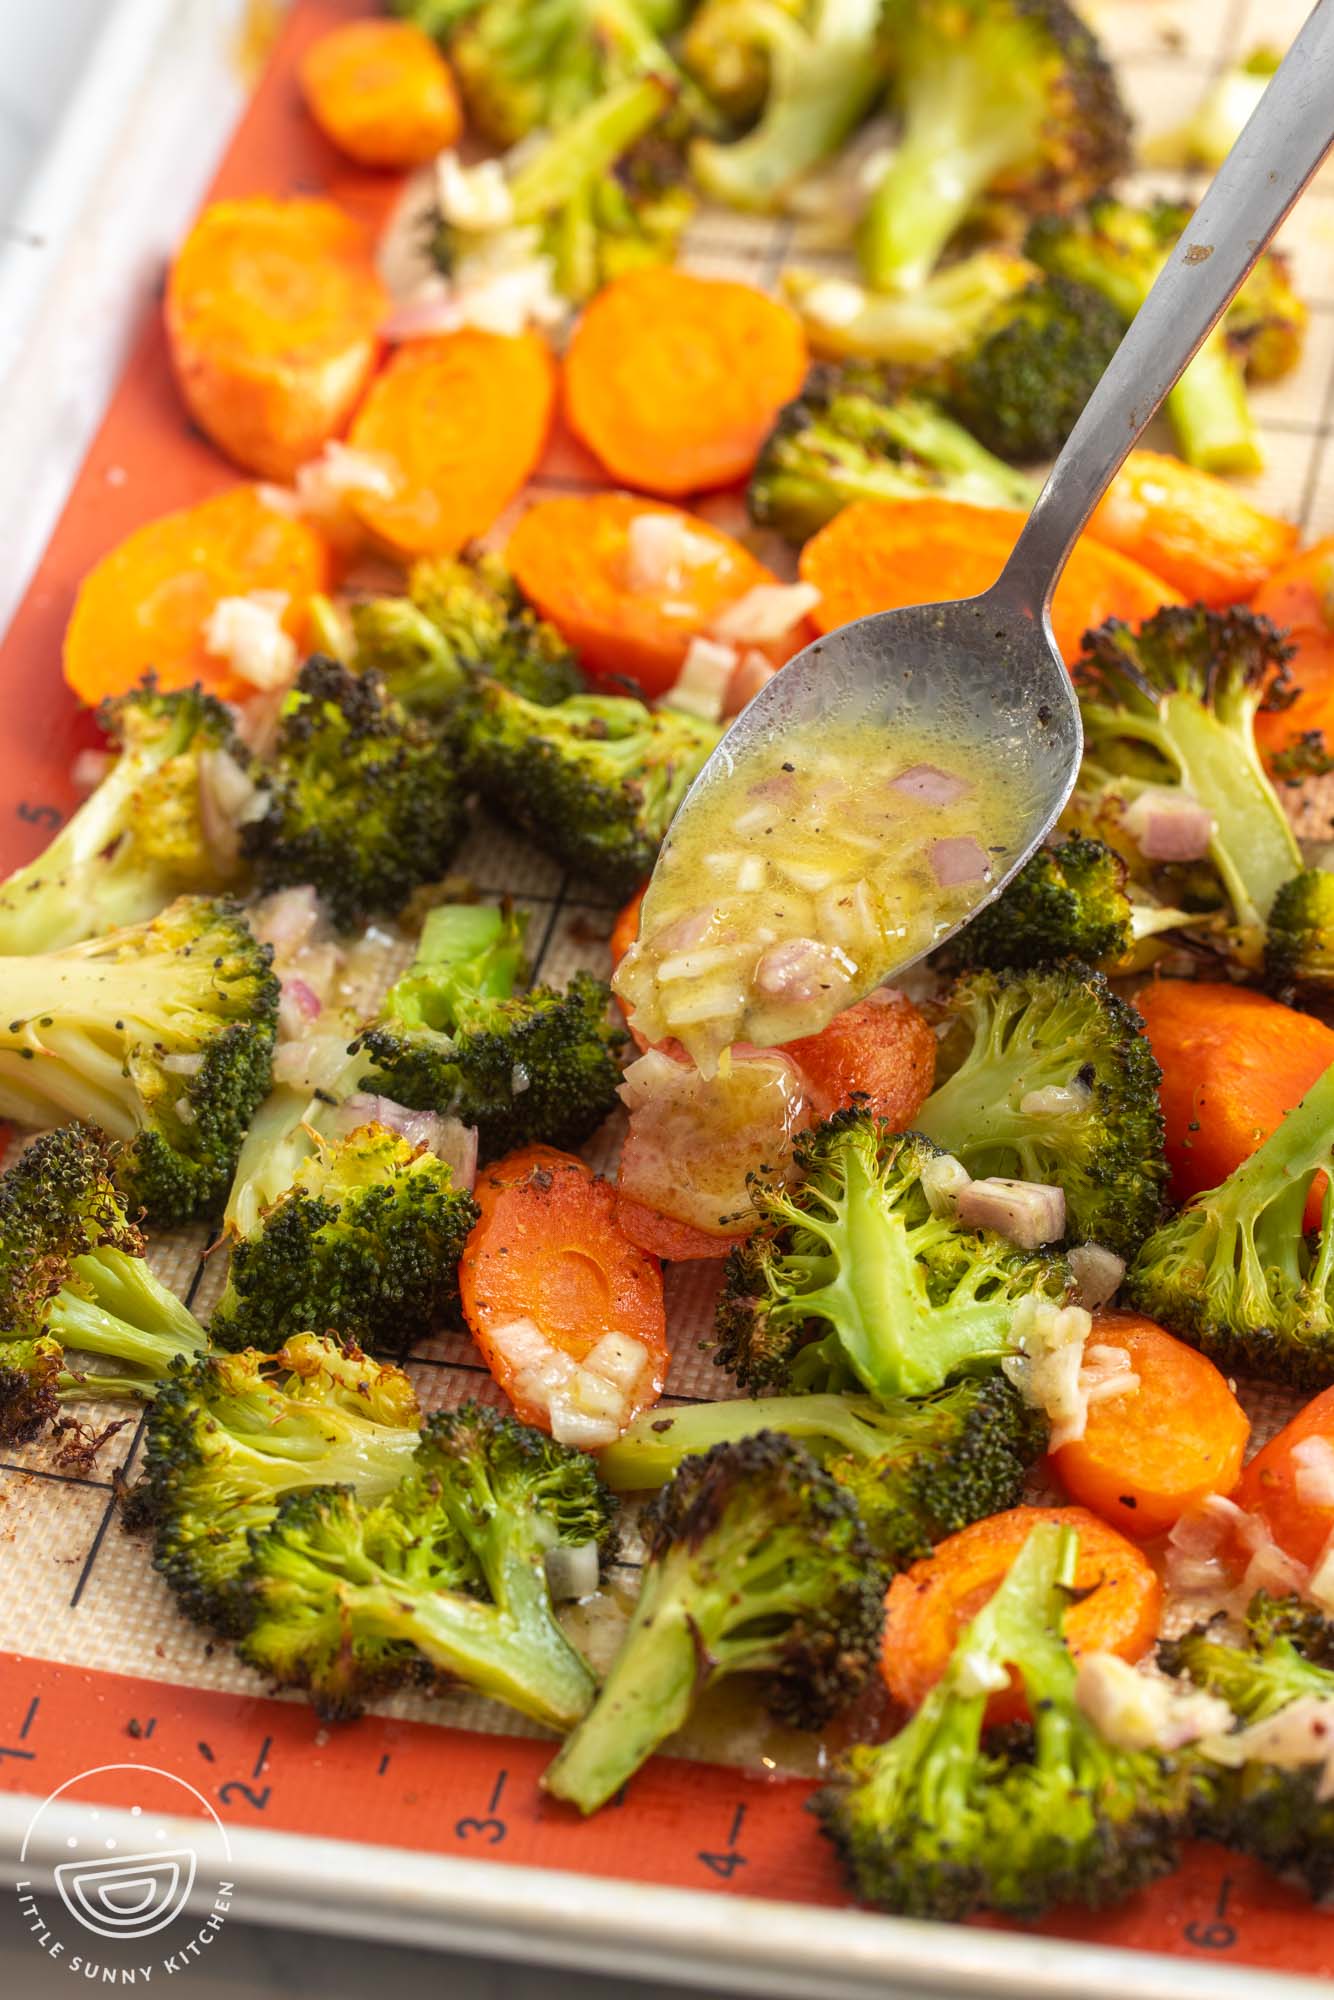 roasted carrots and broccoli on a silpat. a spoon is adding shallot butter sauce over the veggies.